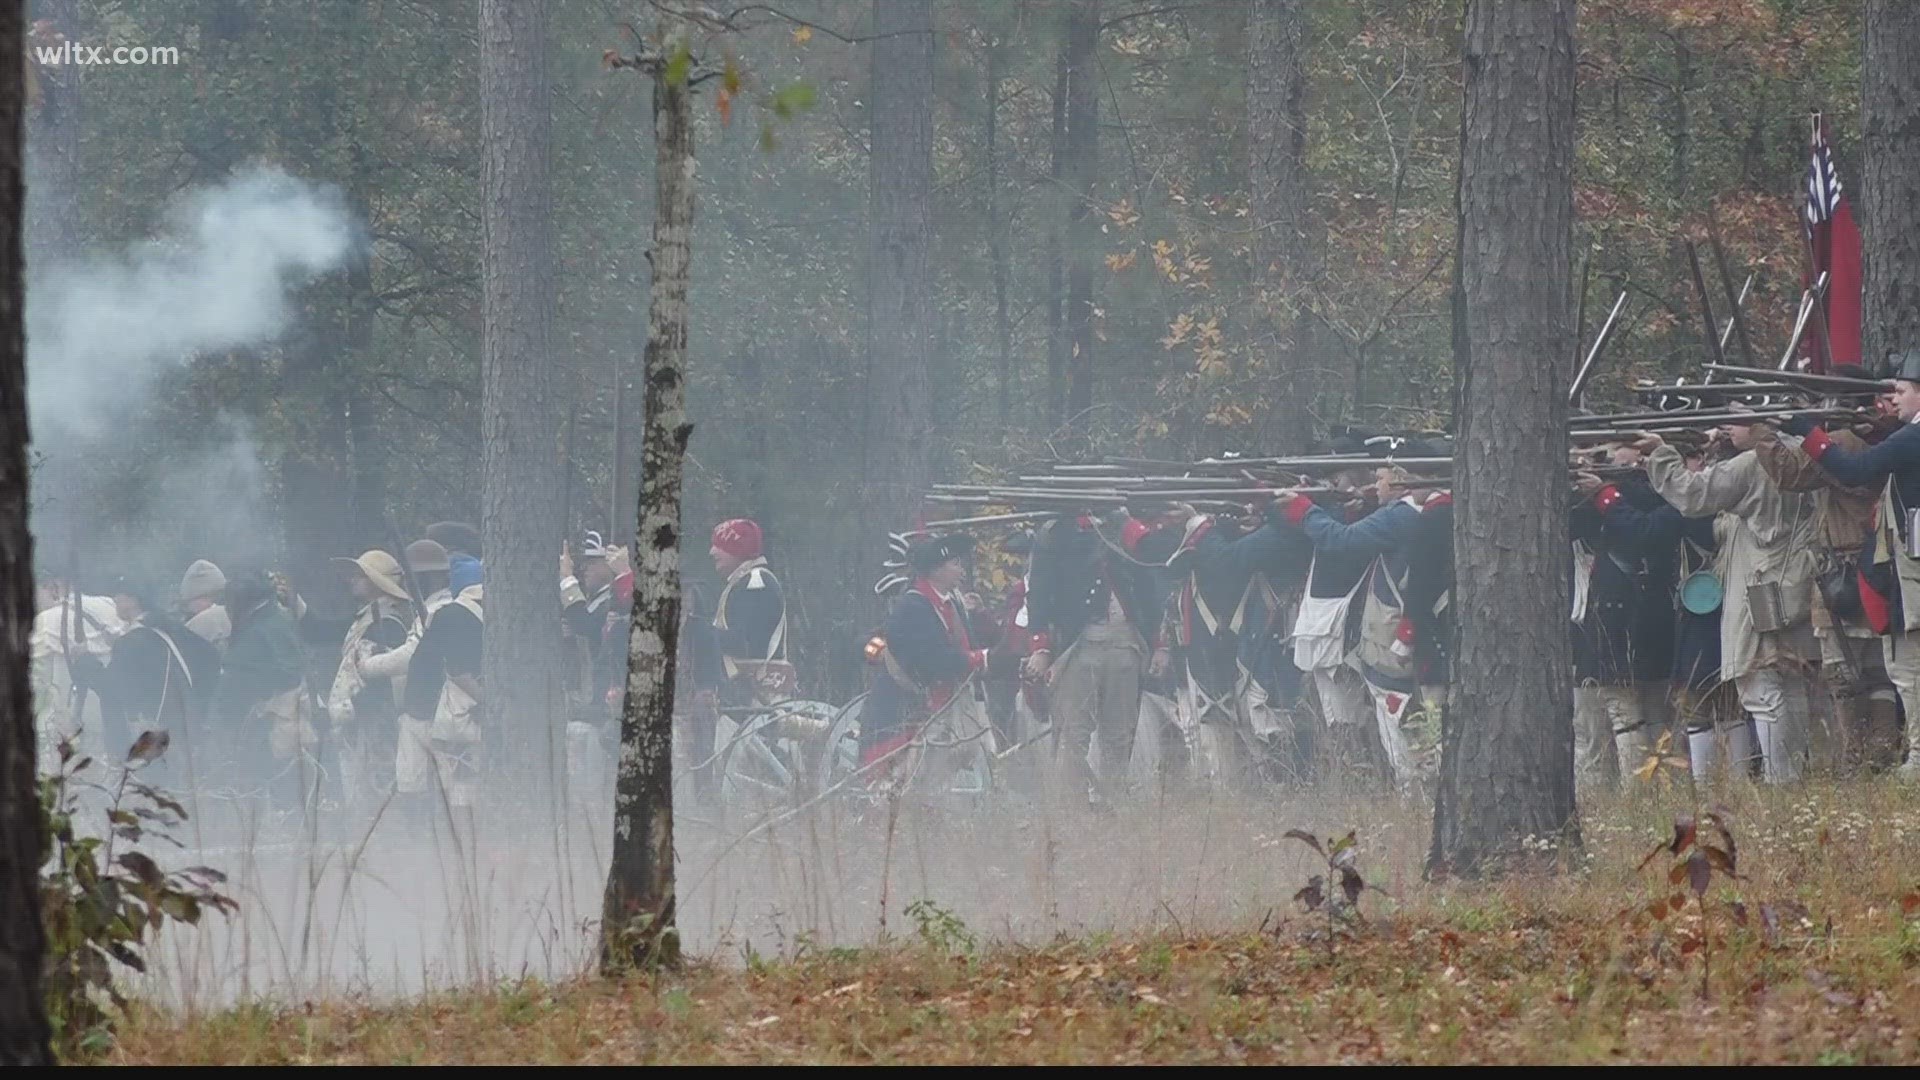 Residents and reenactors participated in the 52nd annual Battle of Camden reenactment.